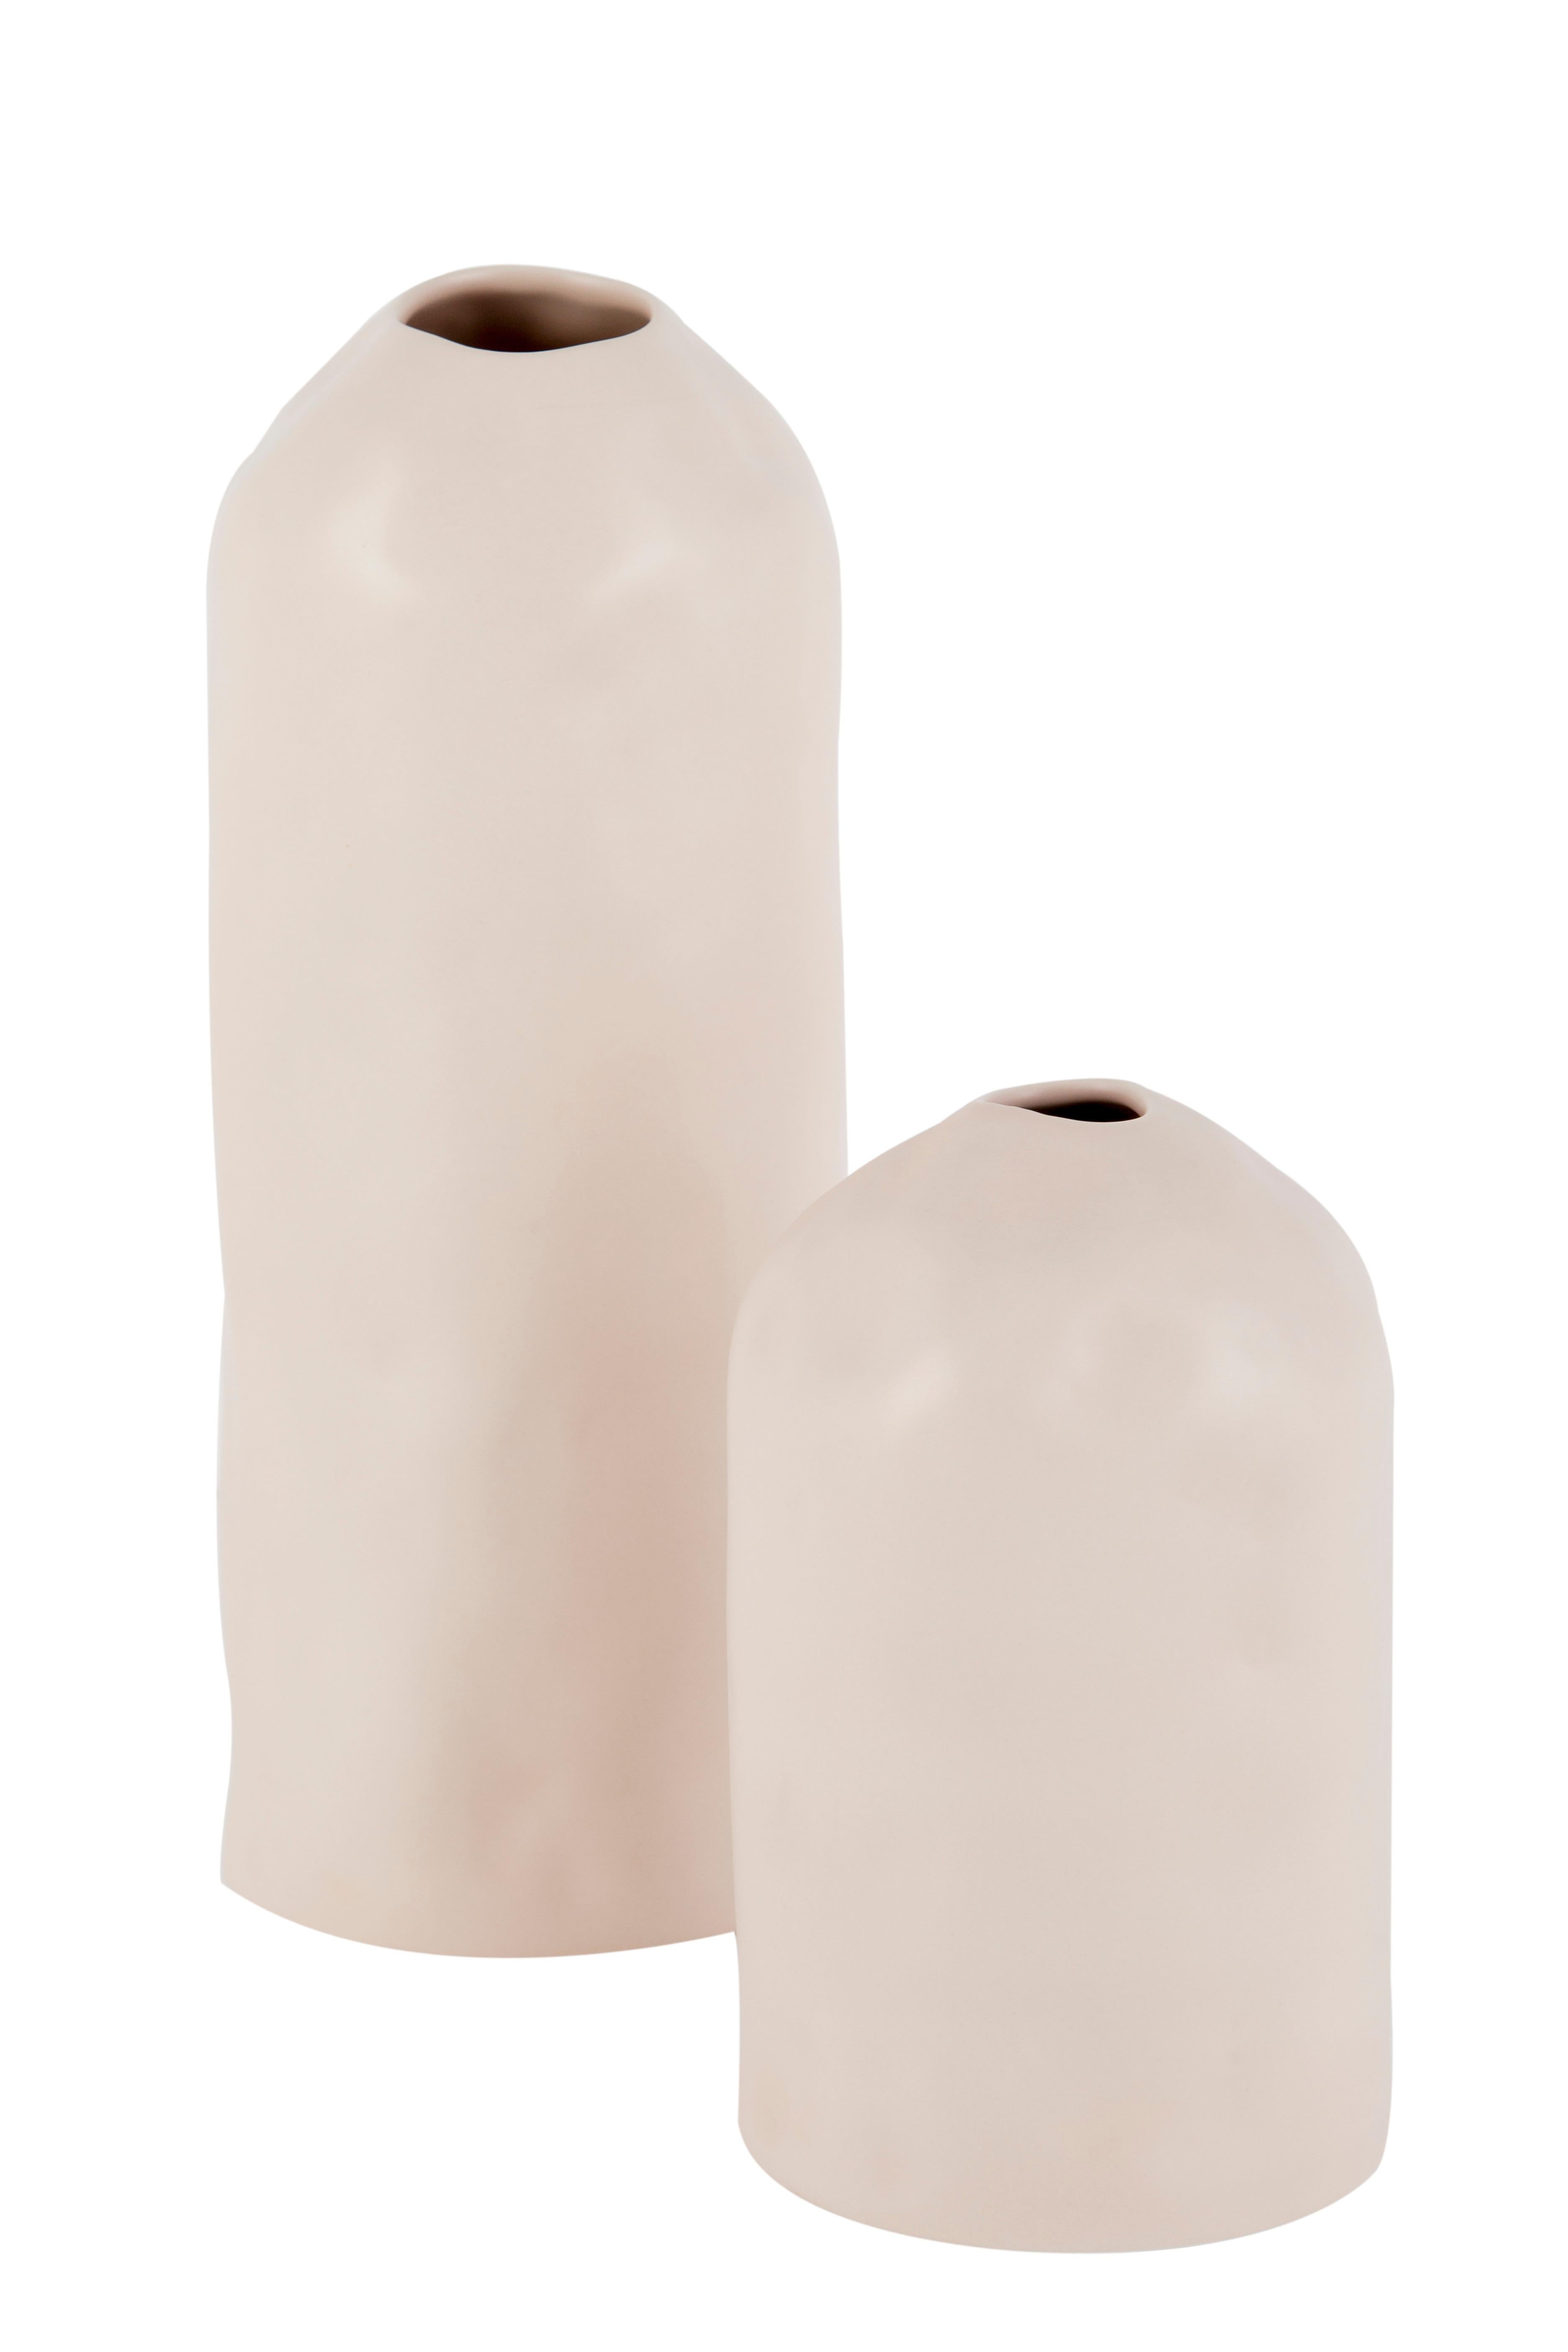 Hand-Painted Set/8 Ceramic Vases, White & Peach, Handmade in Portugal by Lusitanus Home For Sale